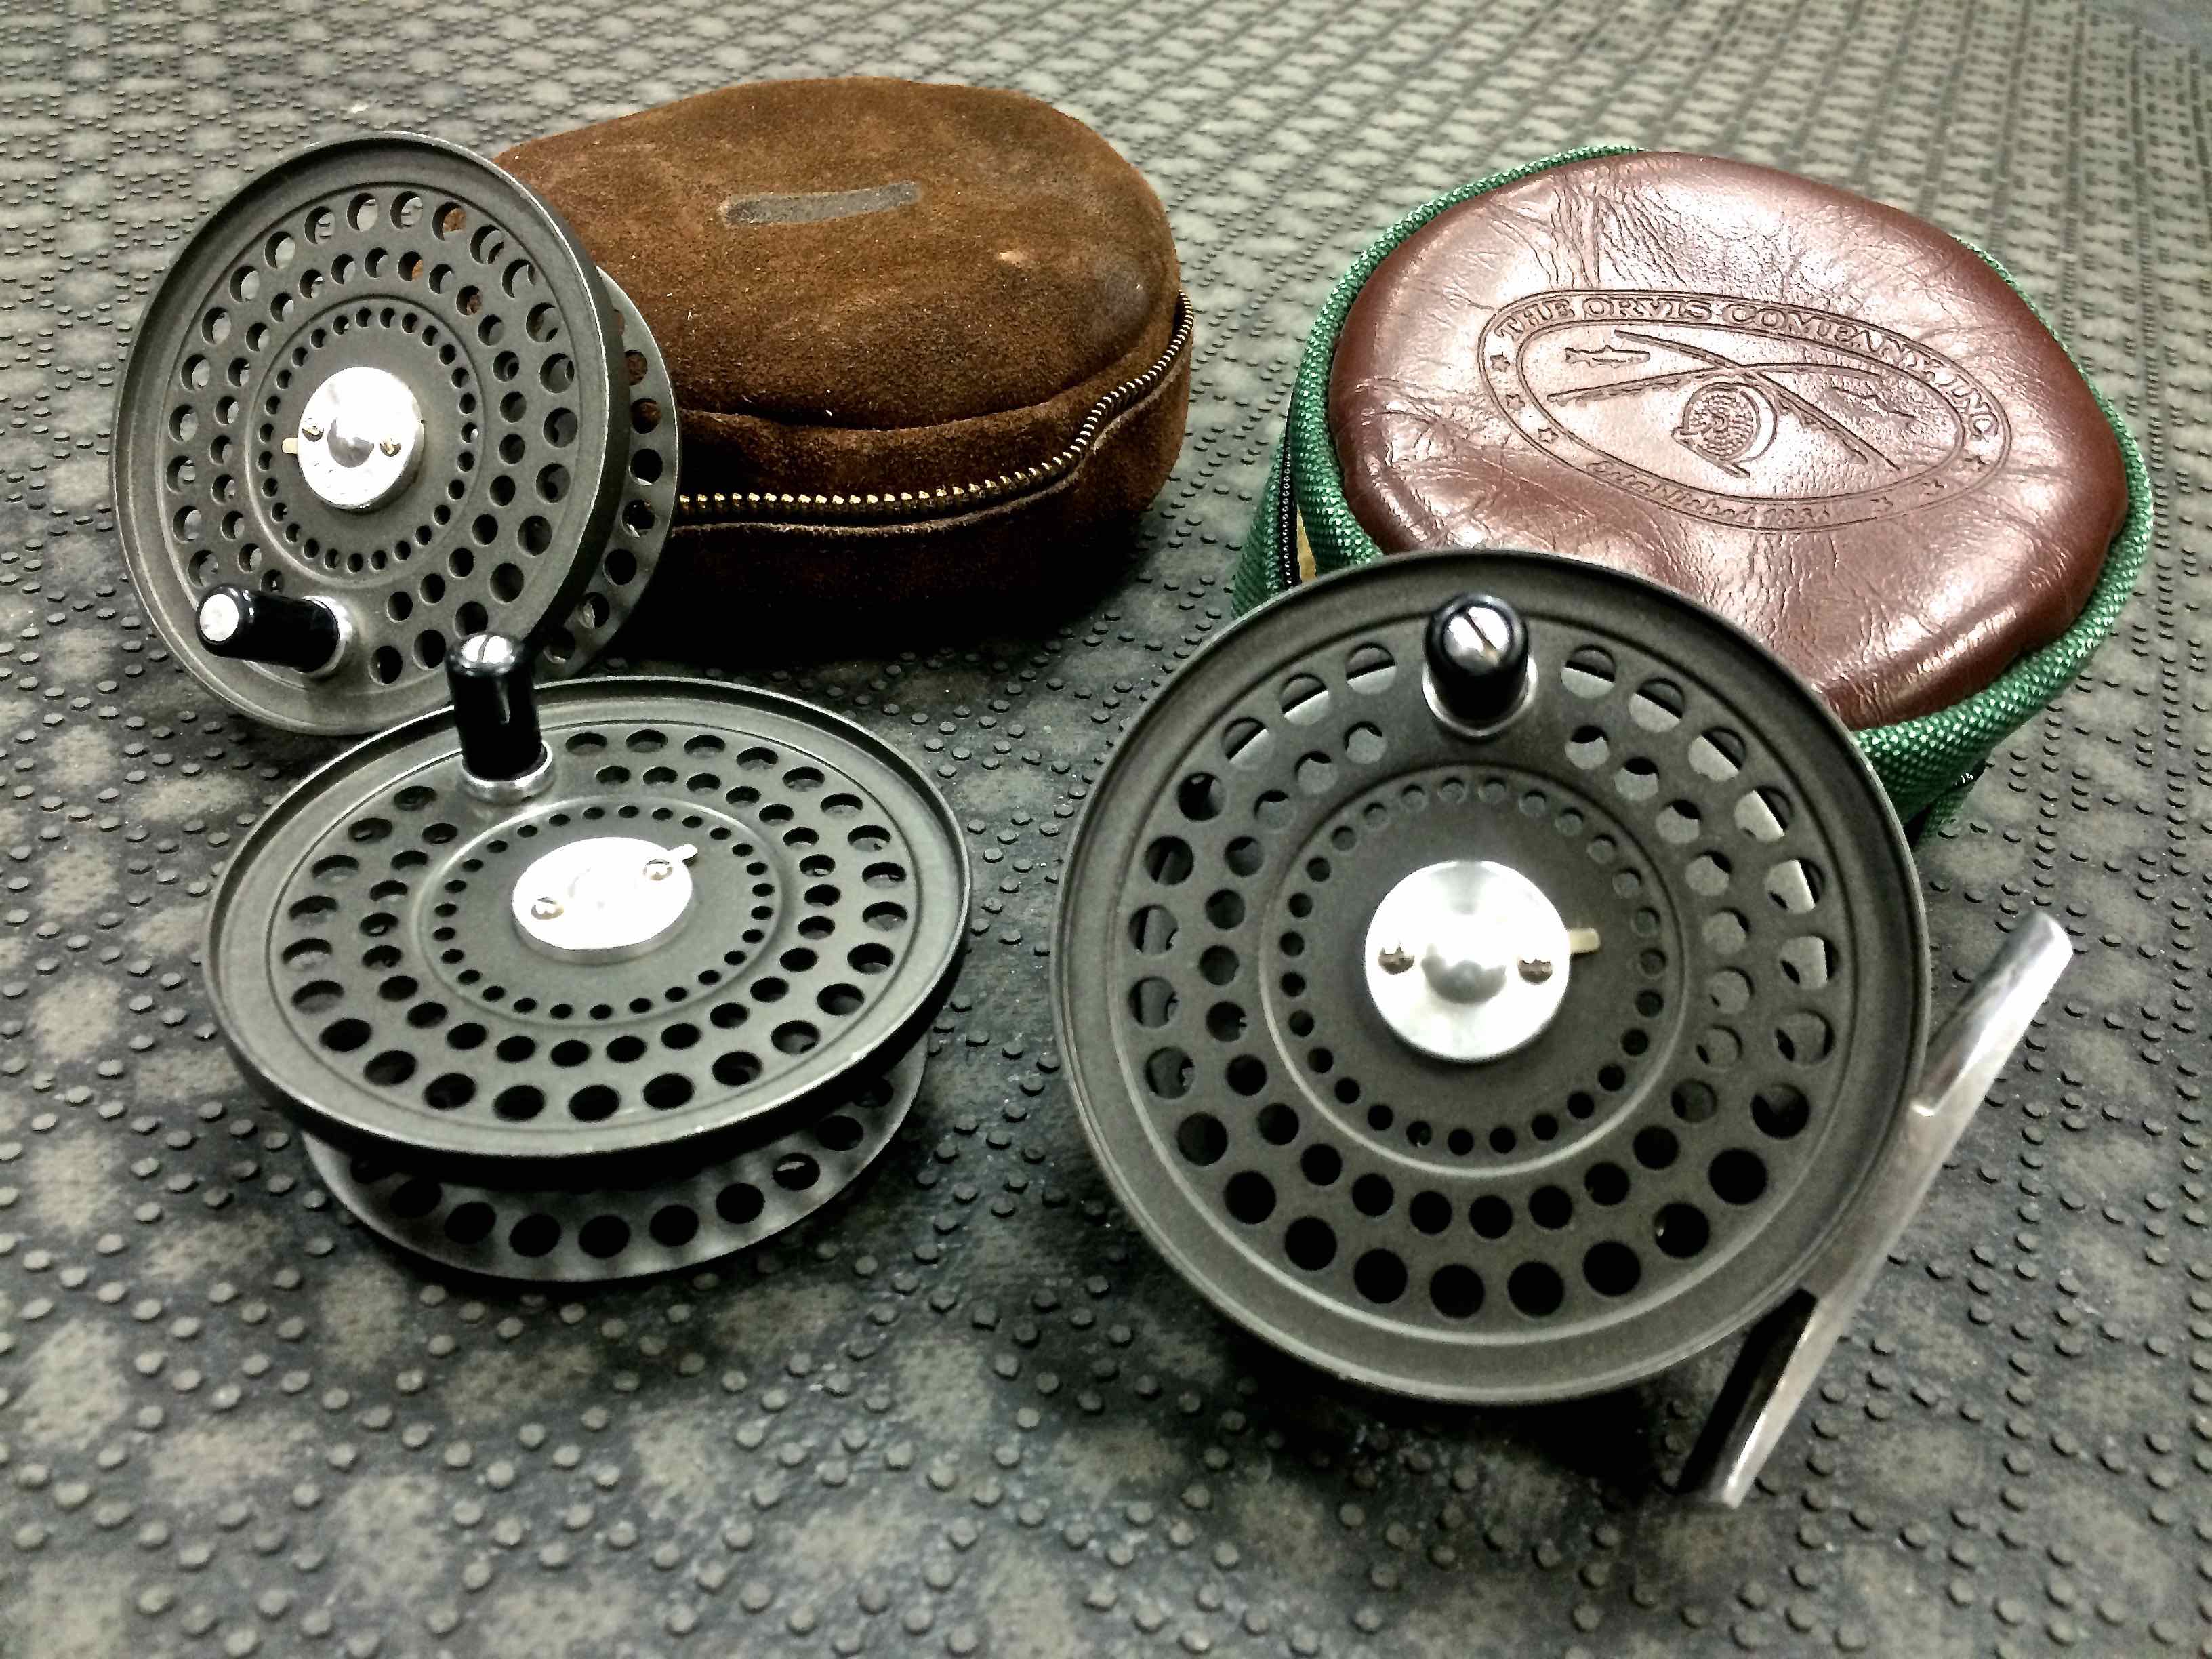 https://thefirstcast.ca/wp-content/uploads/2016/04/Orvis-CFO-III-Fly-Reel-MAde-in-England-With-2-Spare-Spools-BB.jpg